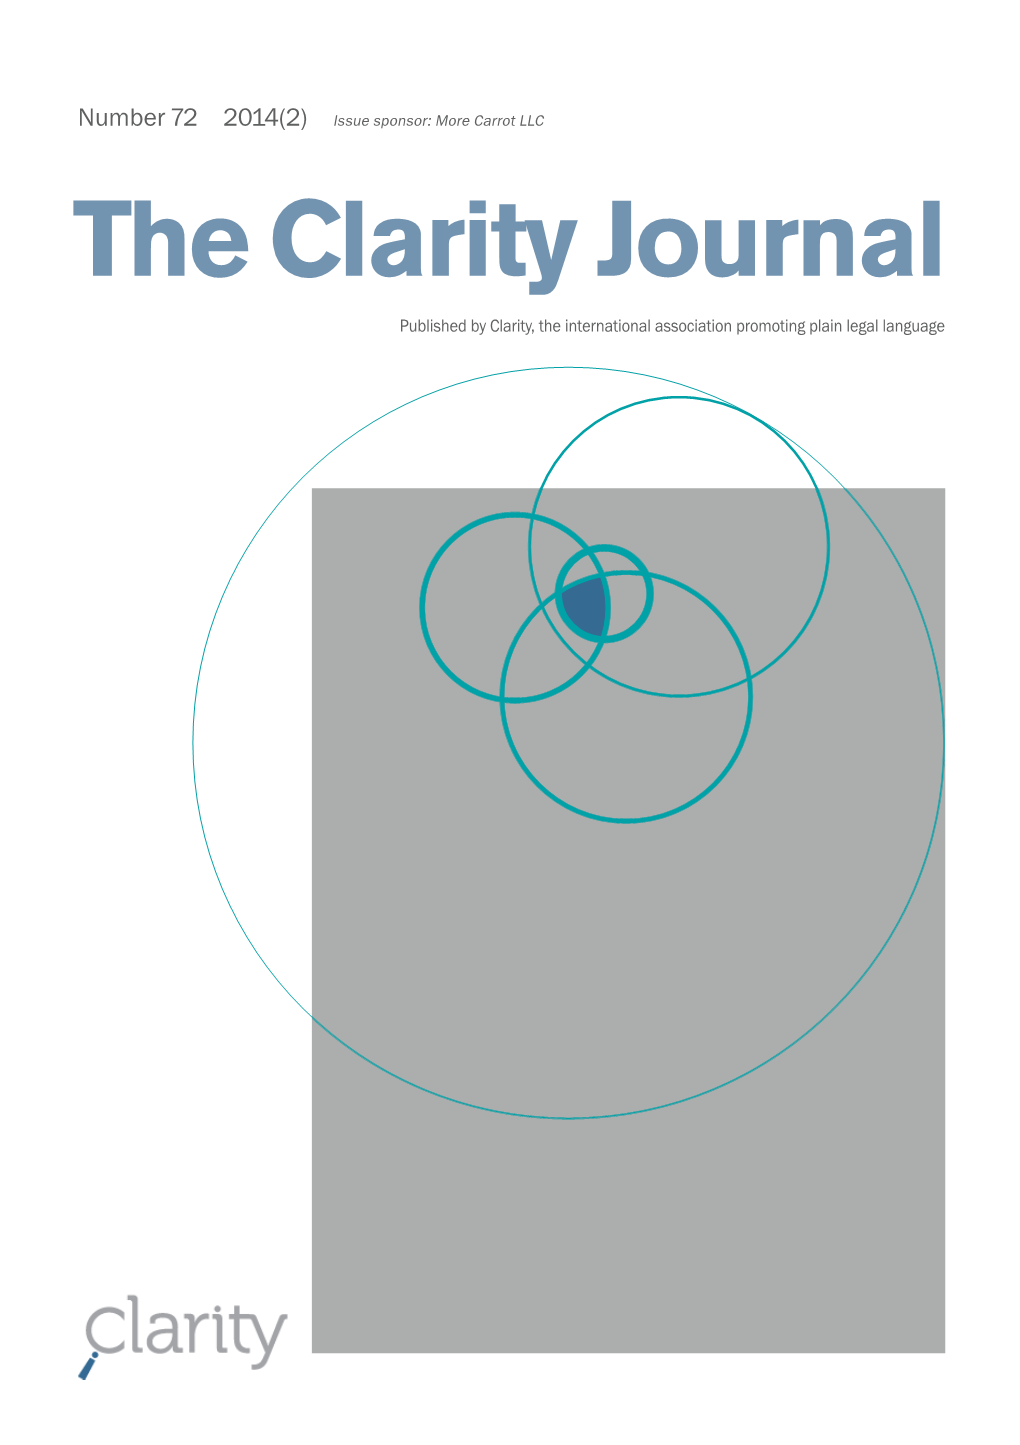 The Clarity Journal Published by Clarity, the International Association Promoting Plain Legal Language